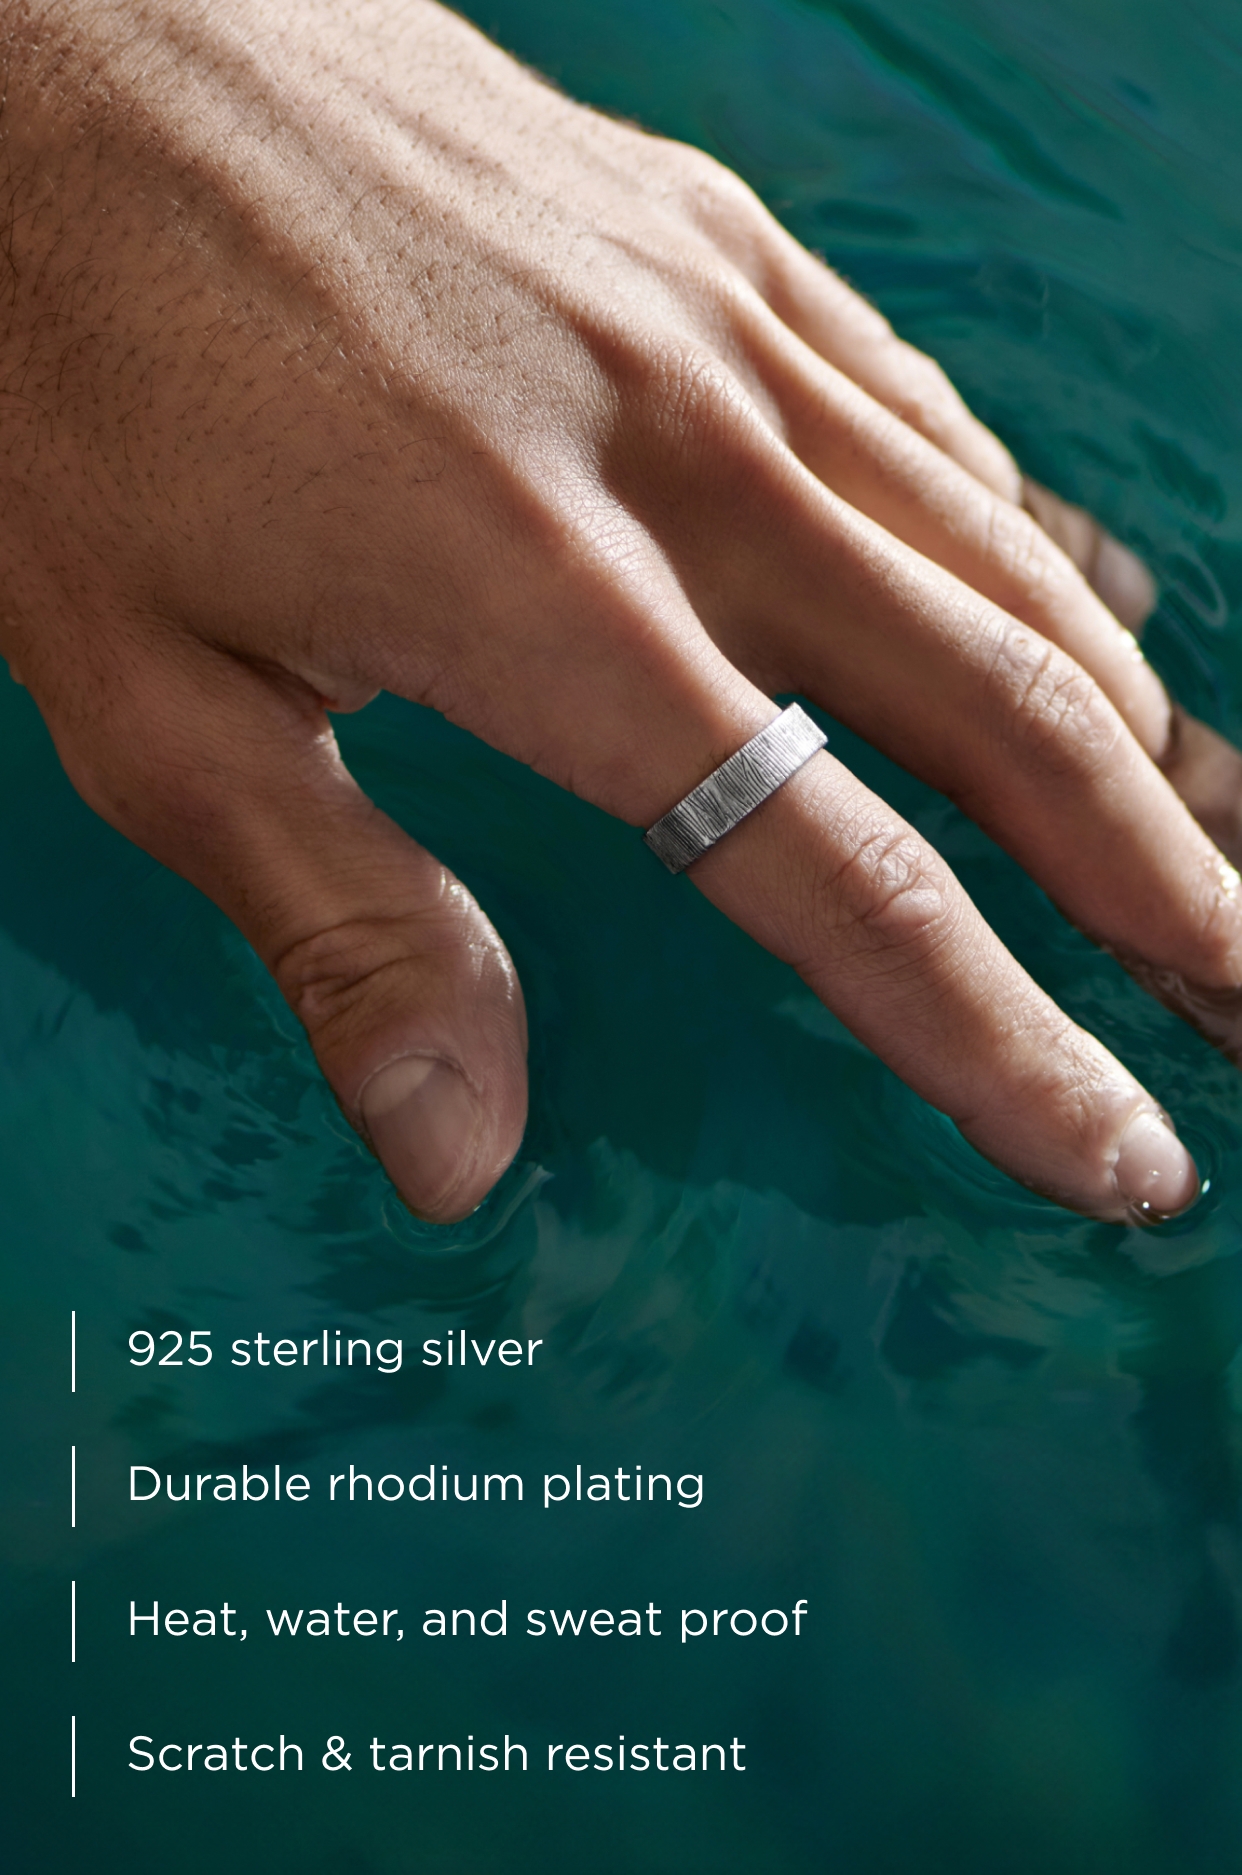 Adrian | 6 mm 925 Sterling Silver With Small Sidegren Logo Classic Ring